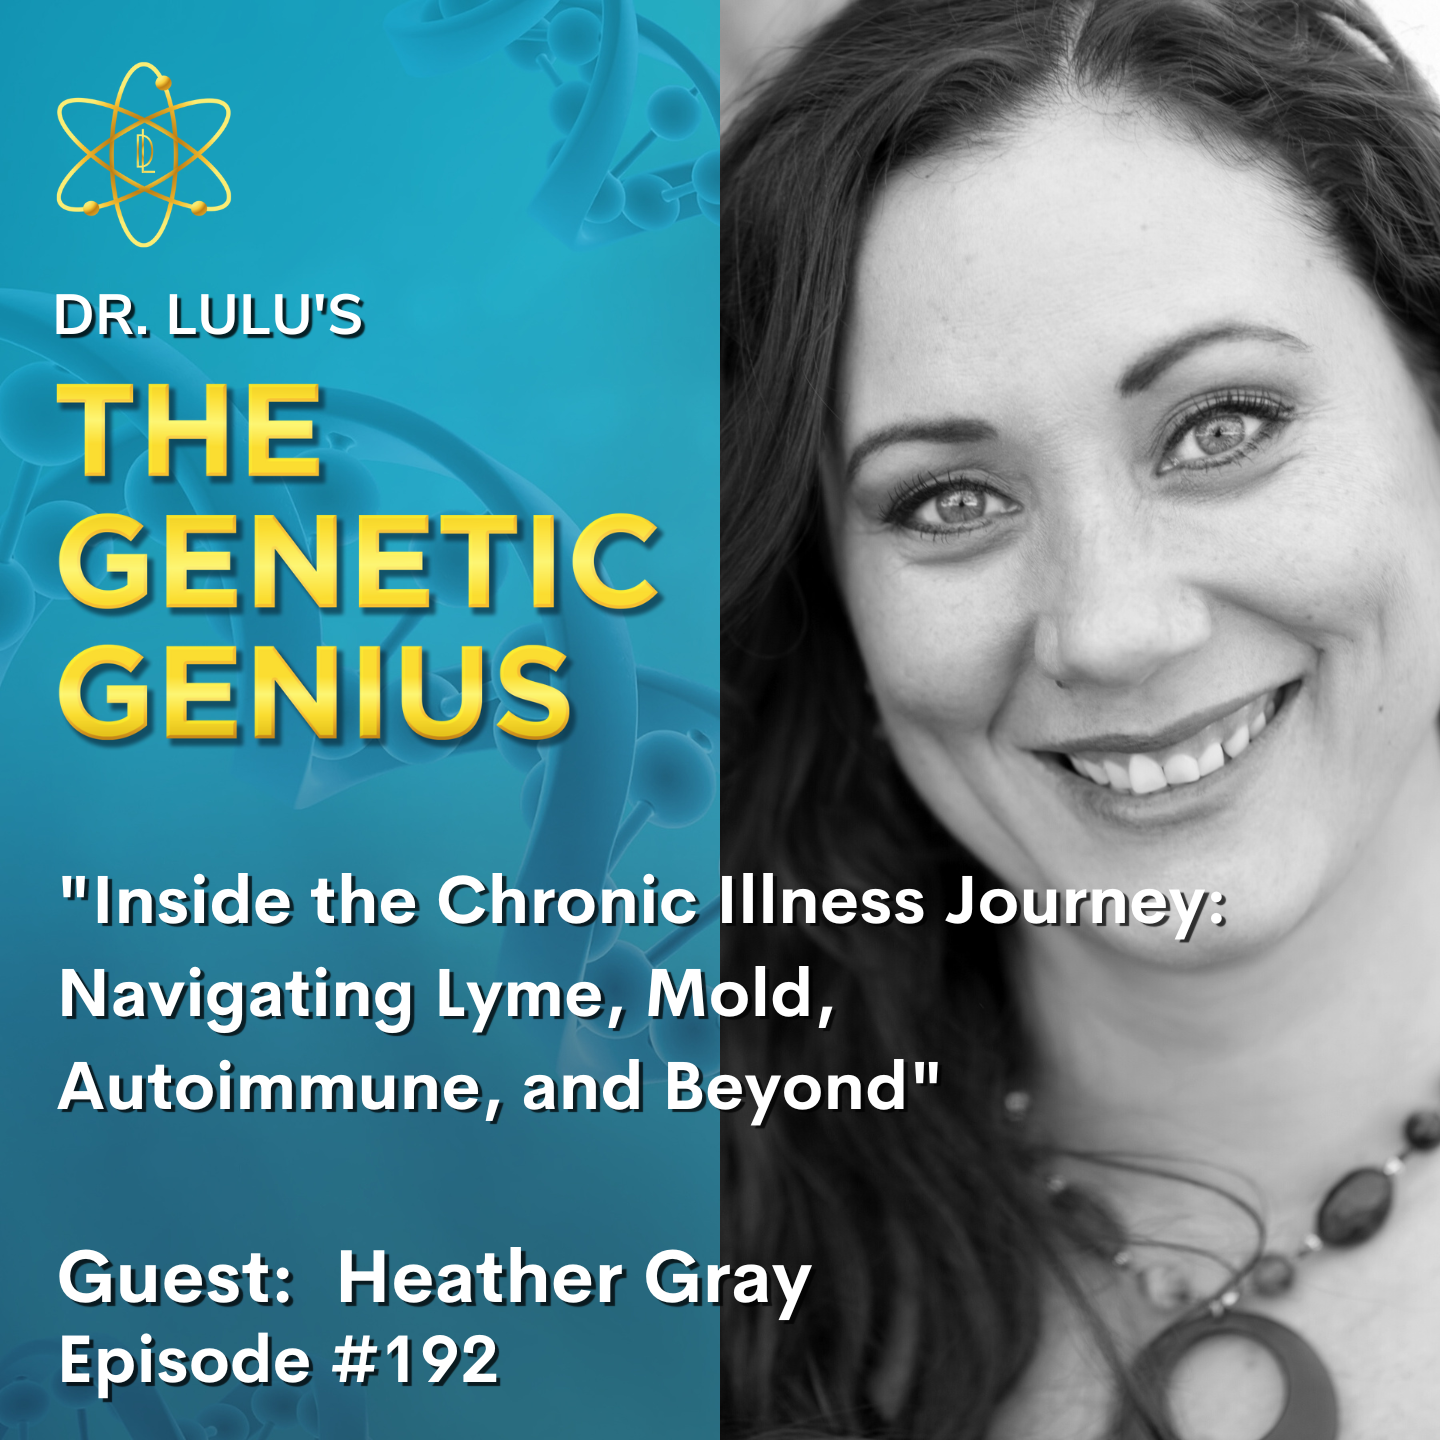 INSIDE THE CHRONIC ILLNESS JOURNEY: NAVIGATING LYME, MOLD, AUTOIMMUNE, AND BEYOND WITH HEATHER GRAY